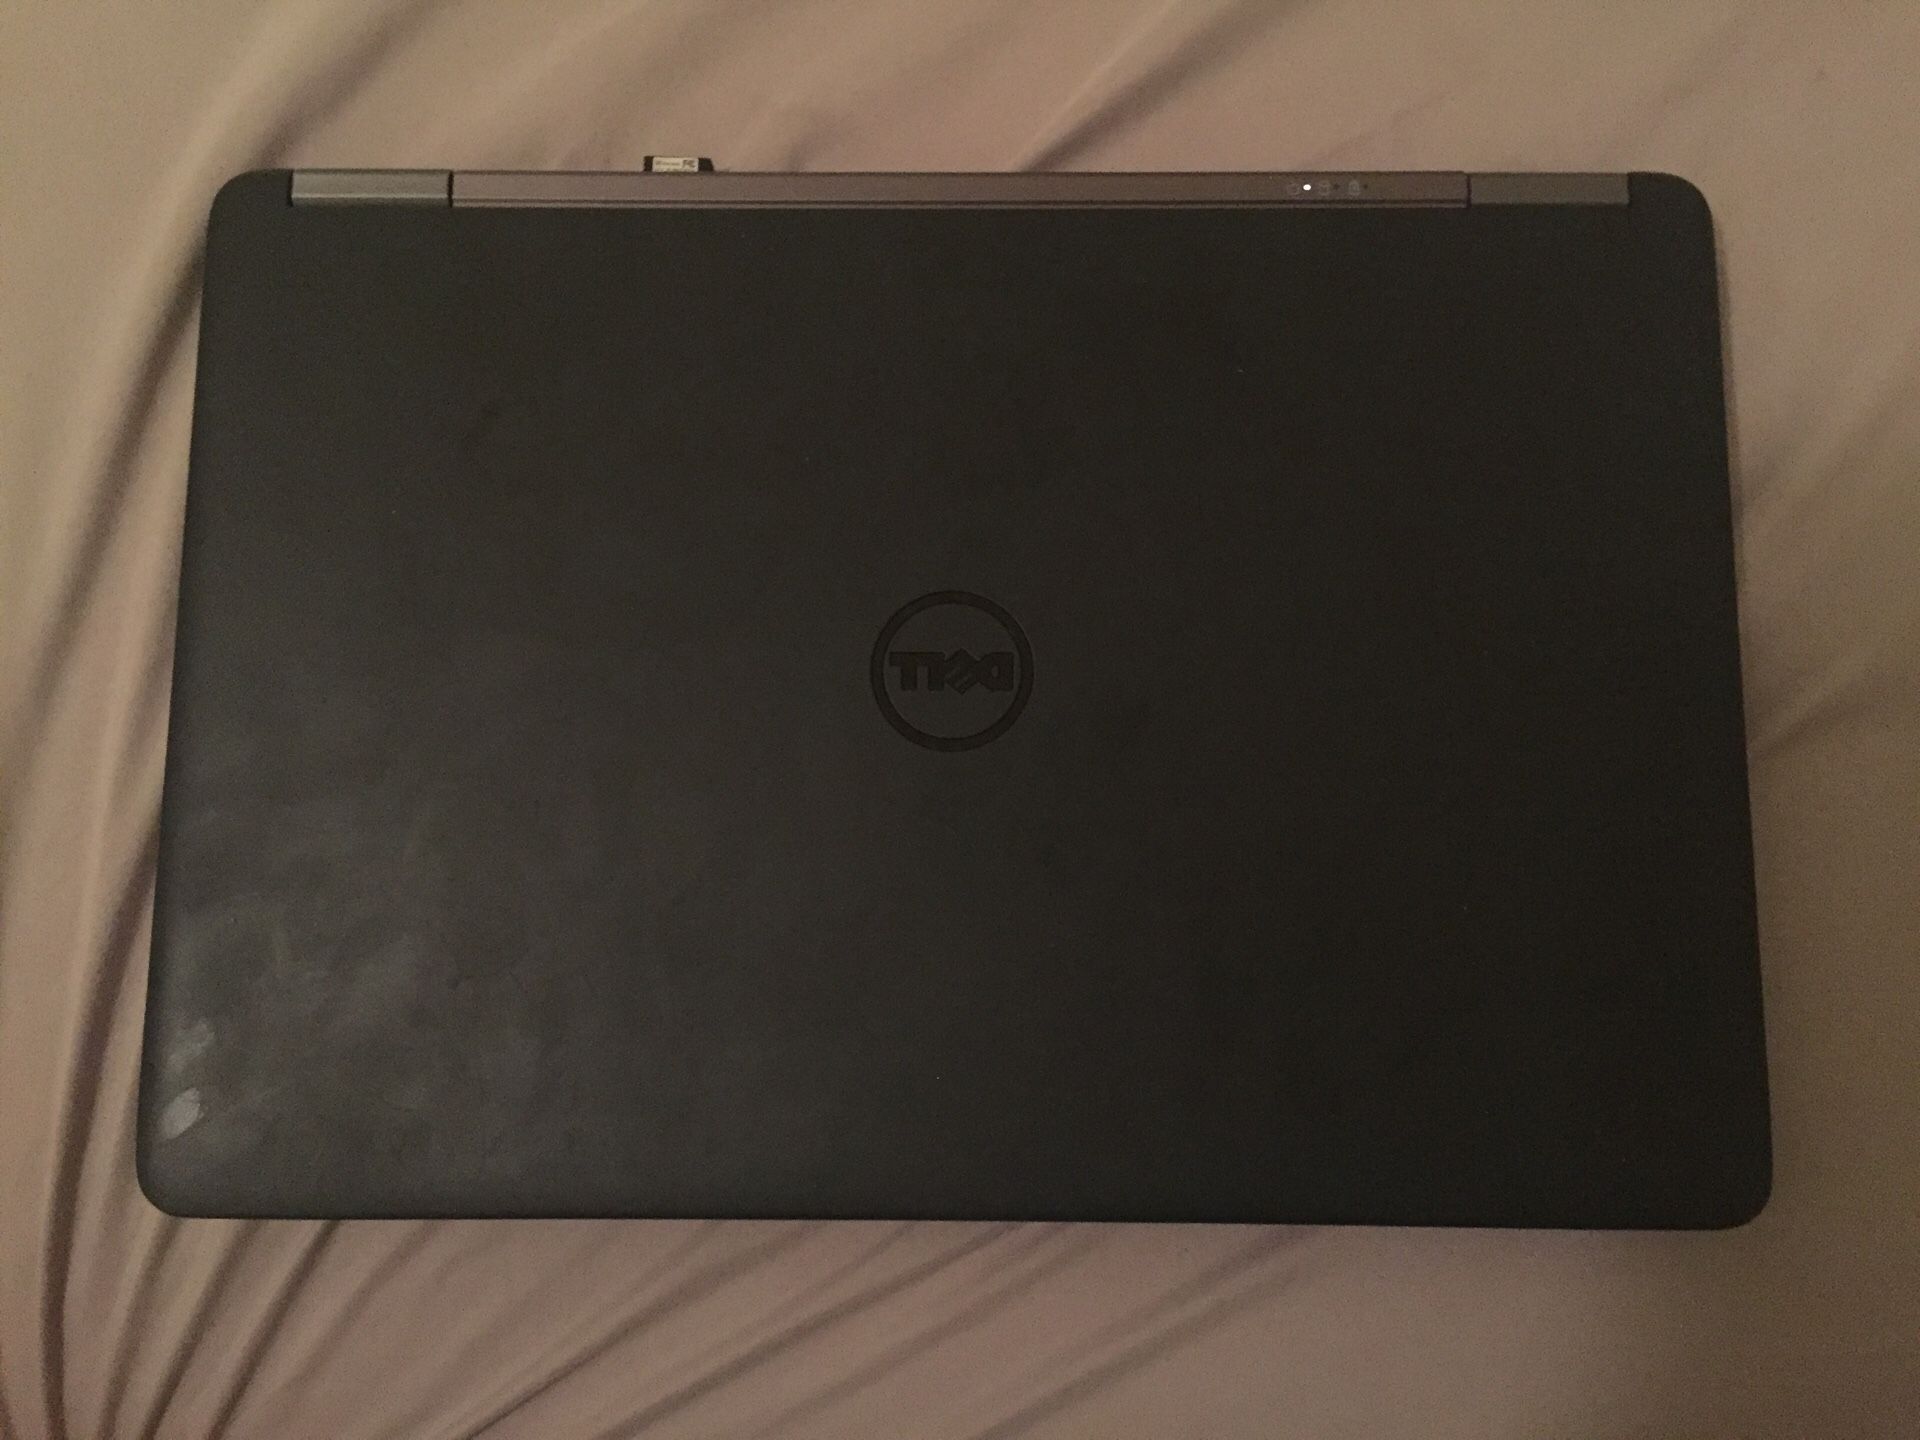 Dell gaming laptop